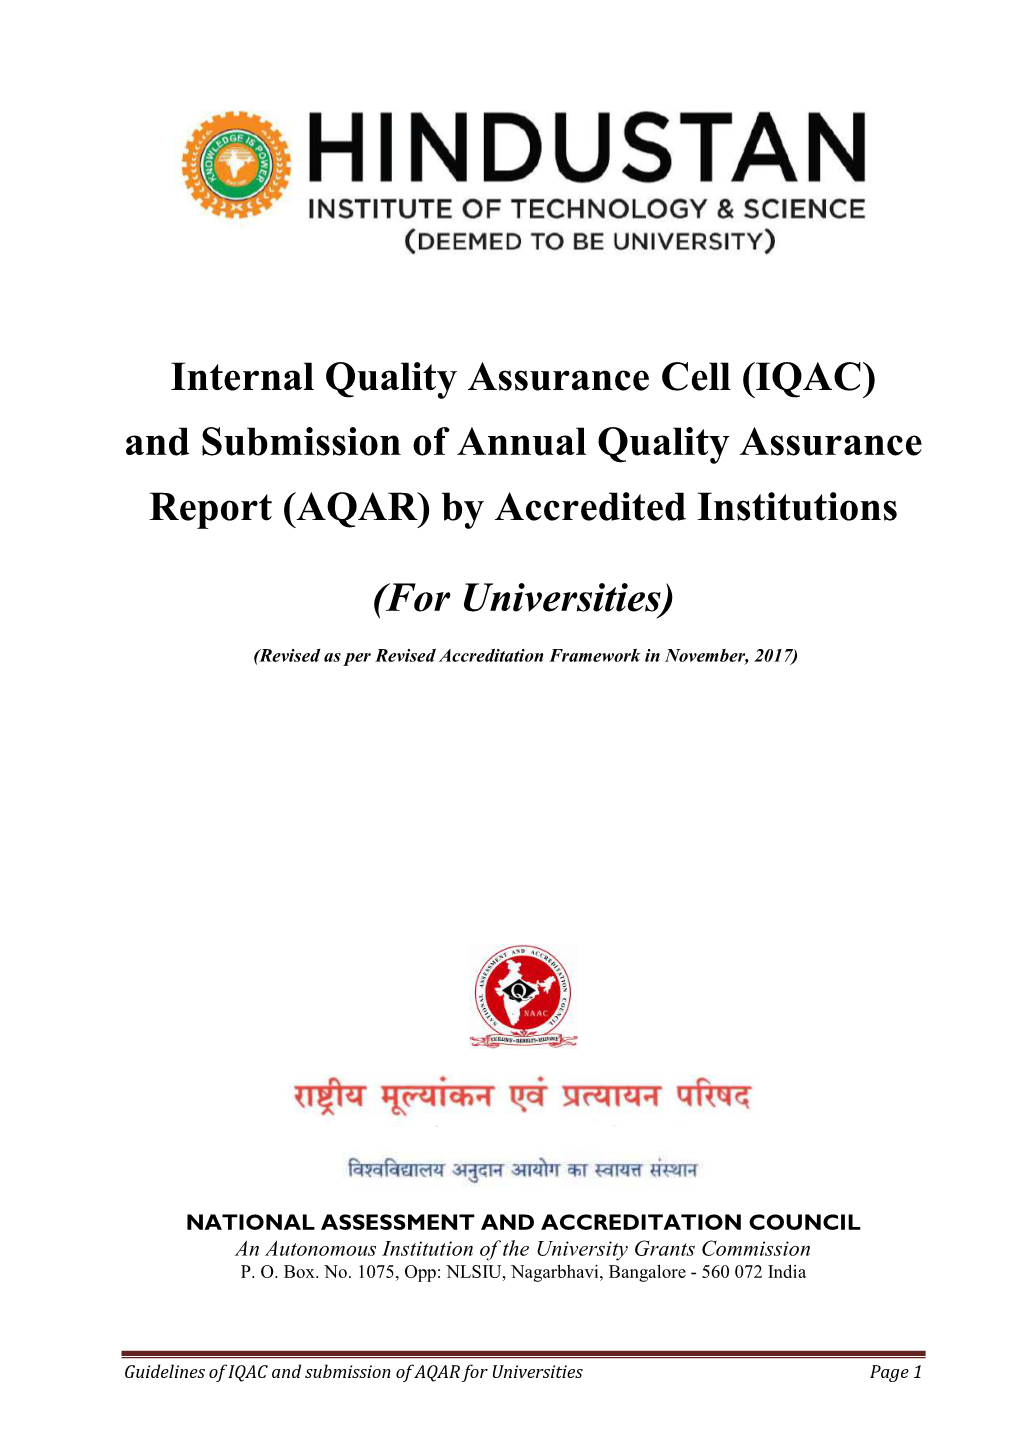 (IQAC) and Submission of Annual Quality Assurance Report (AQAR) by Accredited Institutions